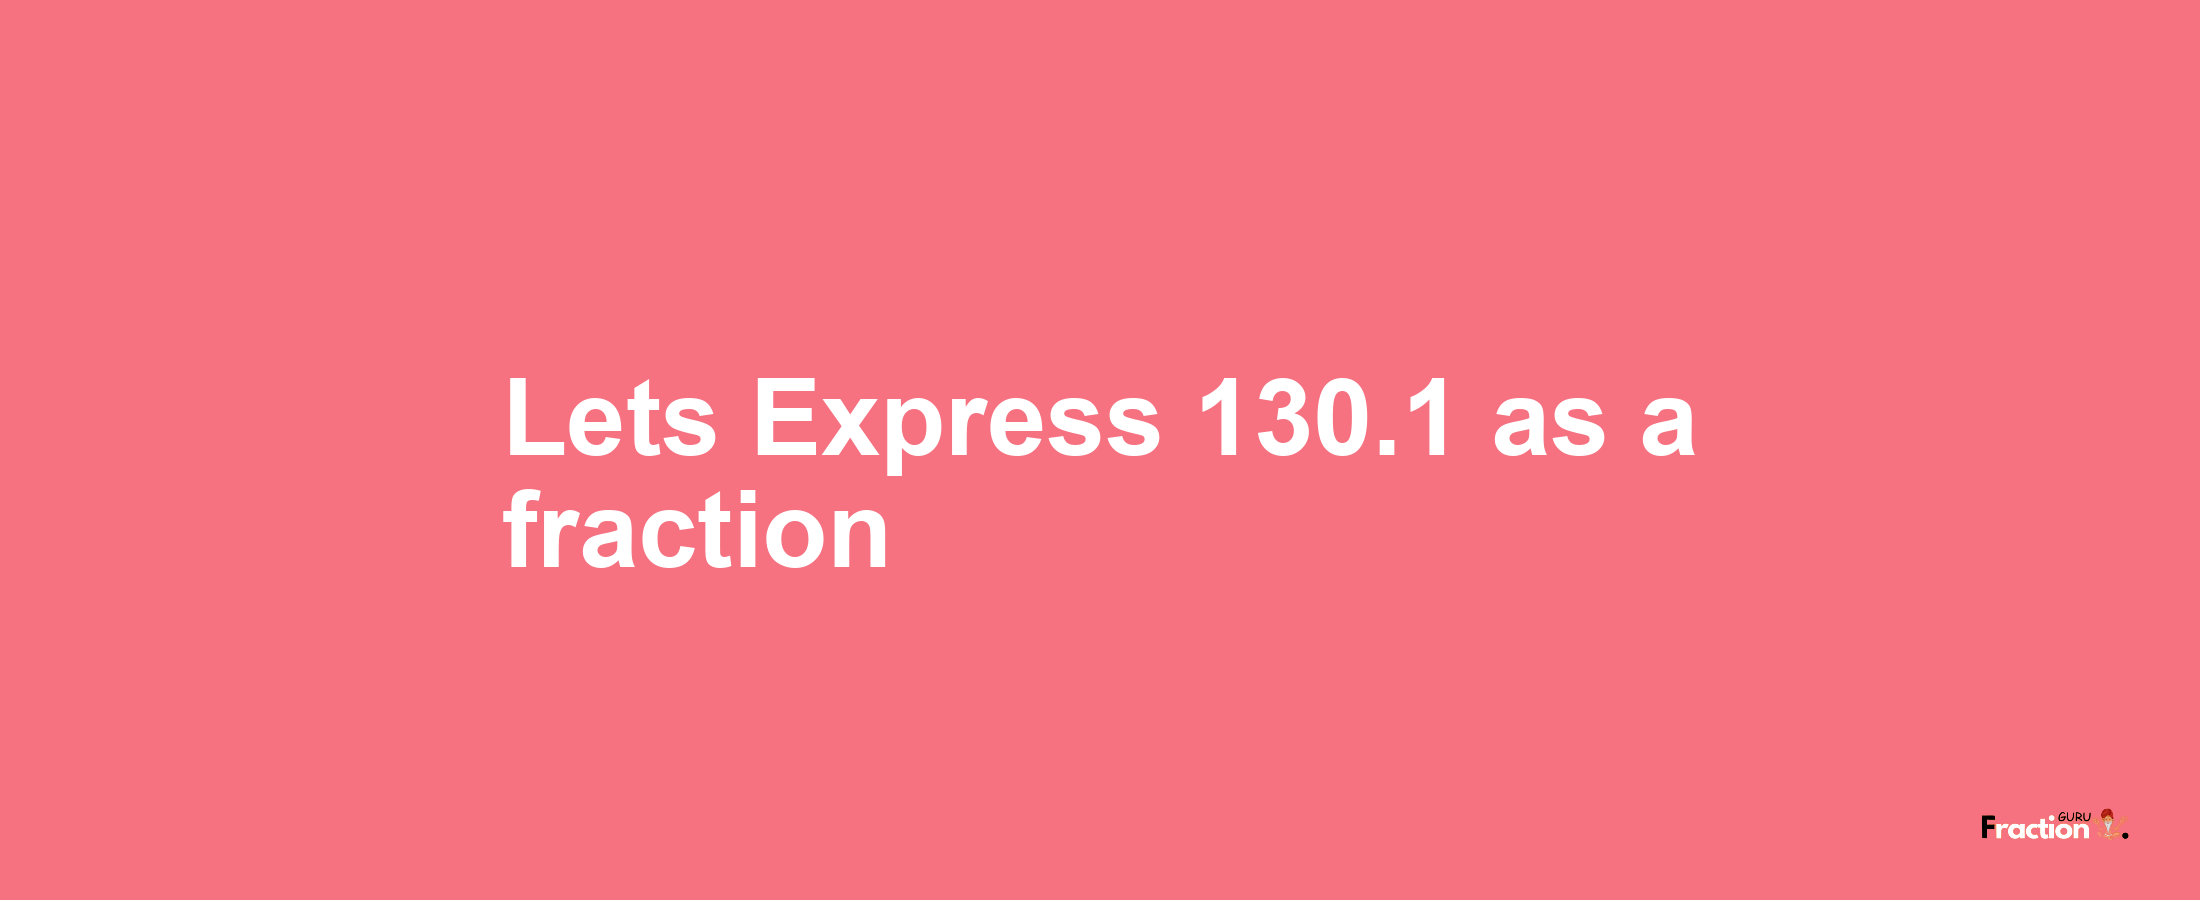 Lets Express 130.1 as afraction